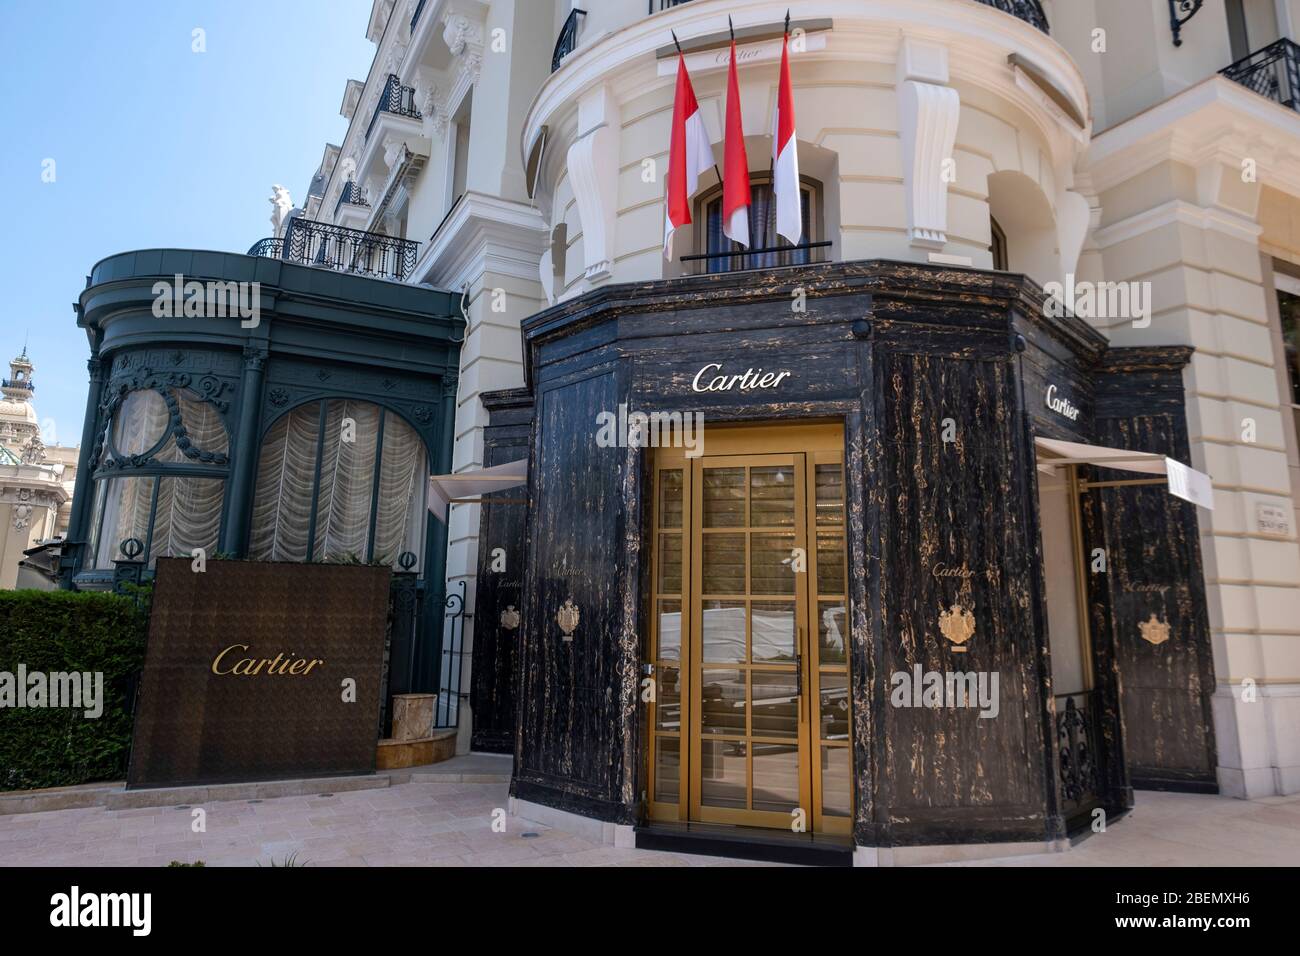 cartier locations europe